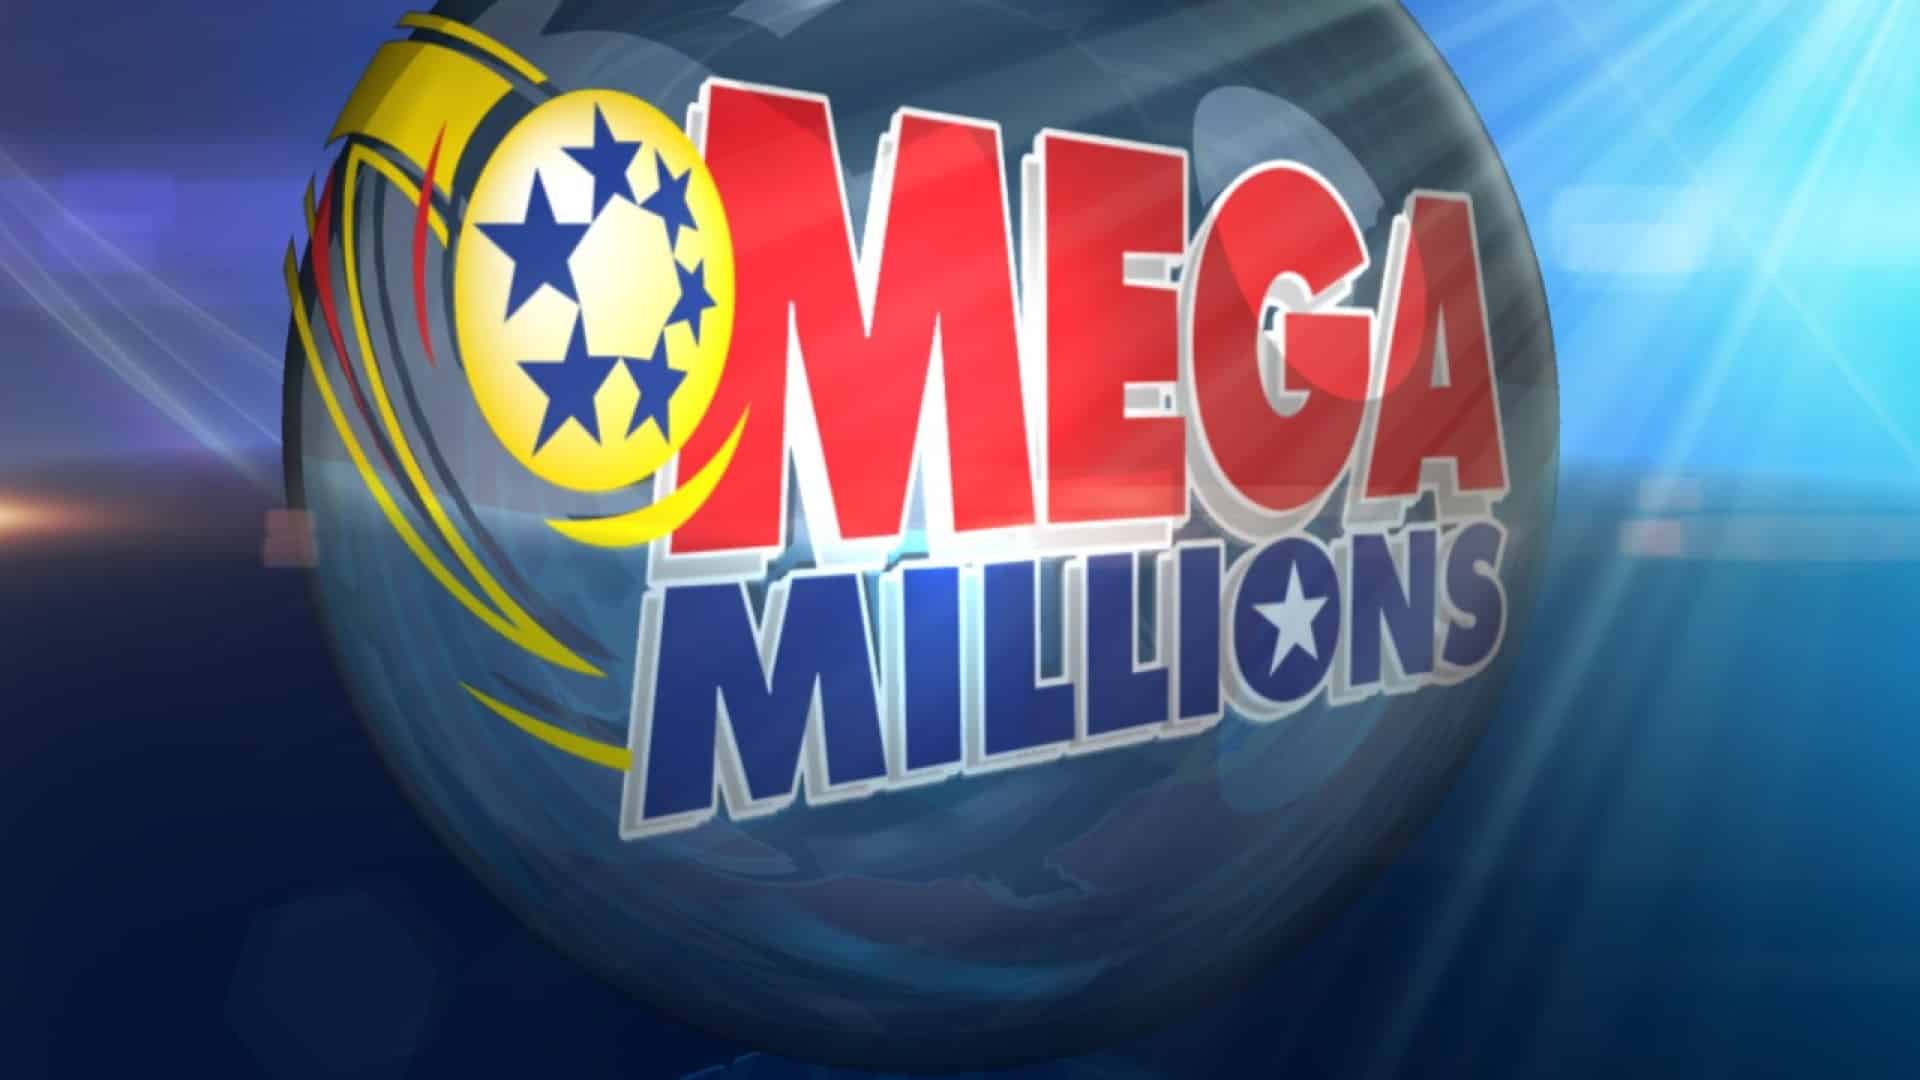 Winning $1M lottery ticket sold in Painted Post